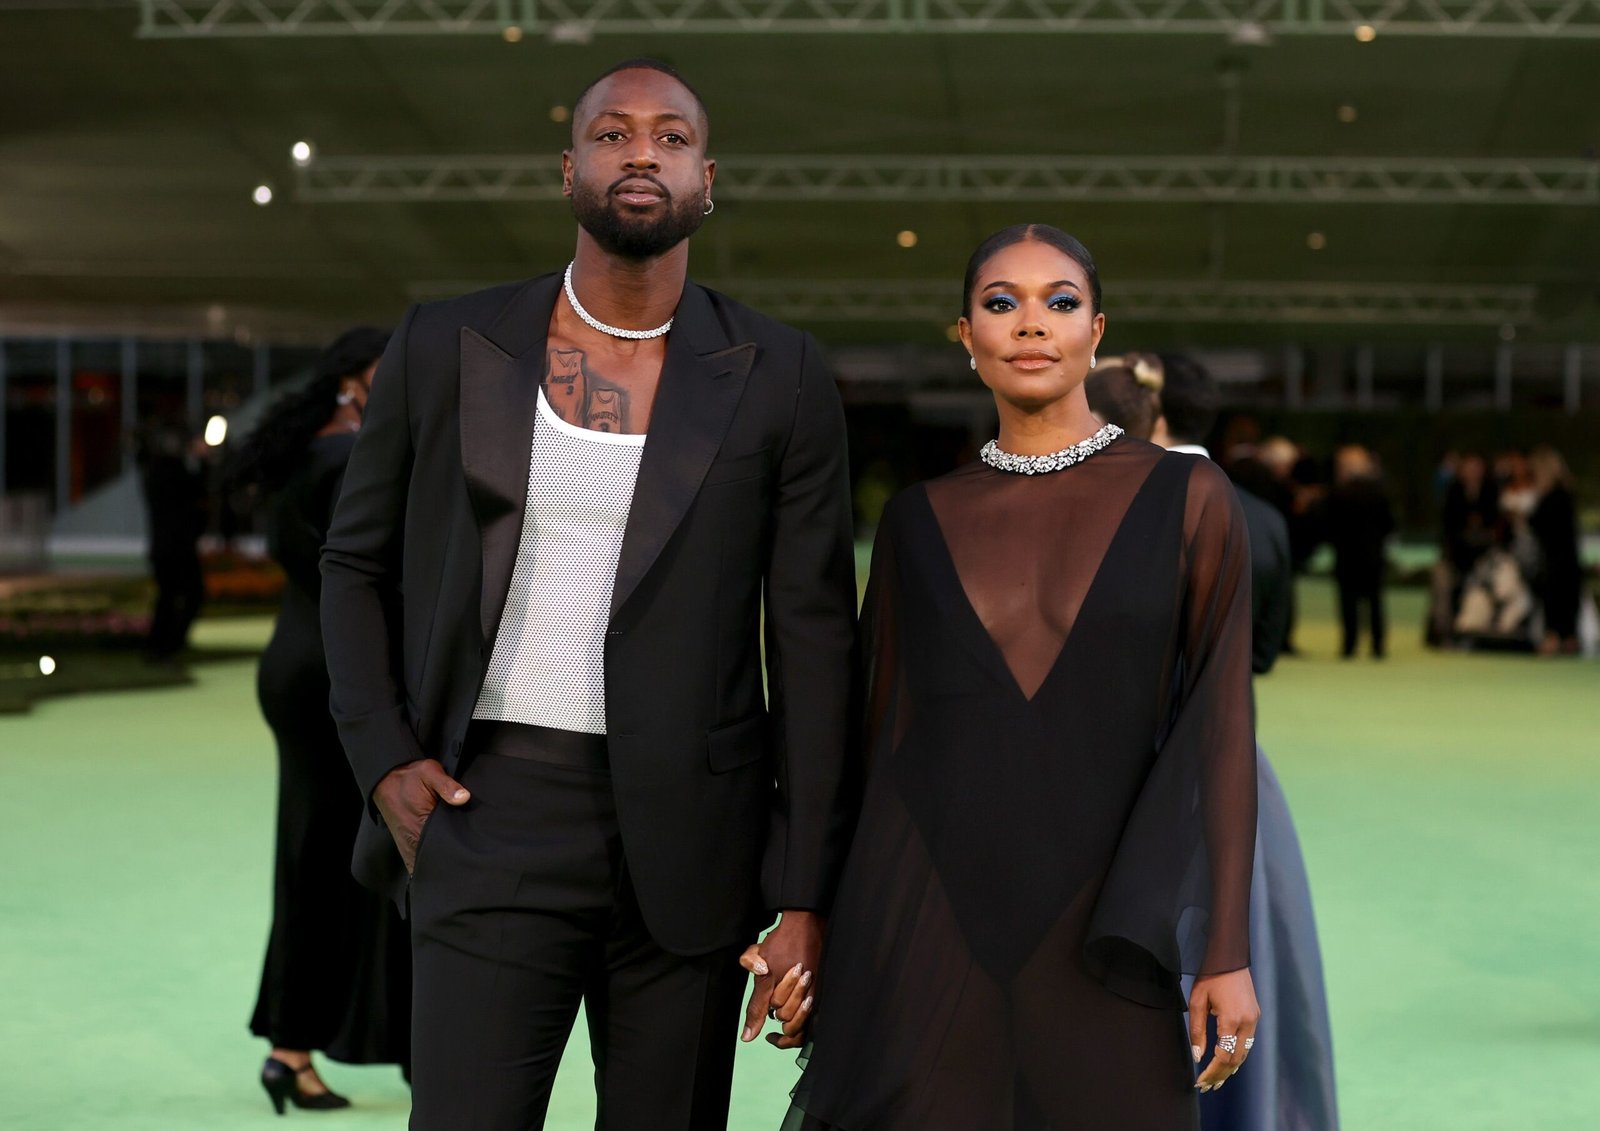 Gabrielle Union and Dwyane Wade ‘Mesh’ in Matching Survey-By means of Ensembles